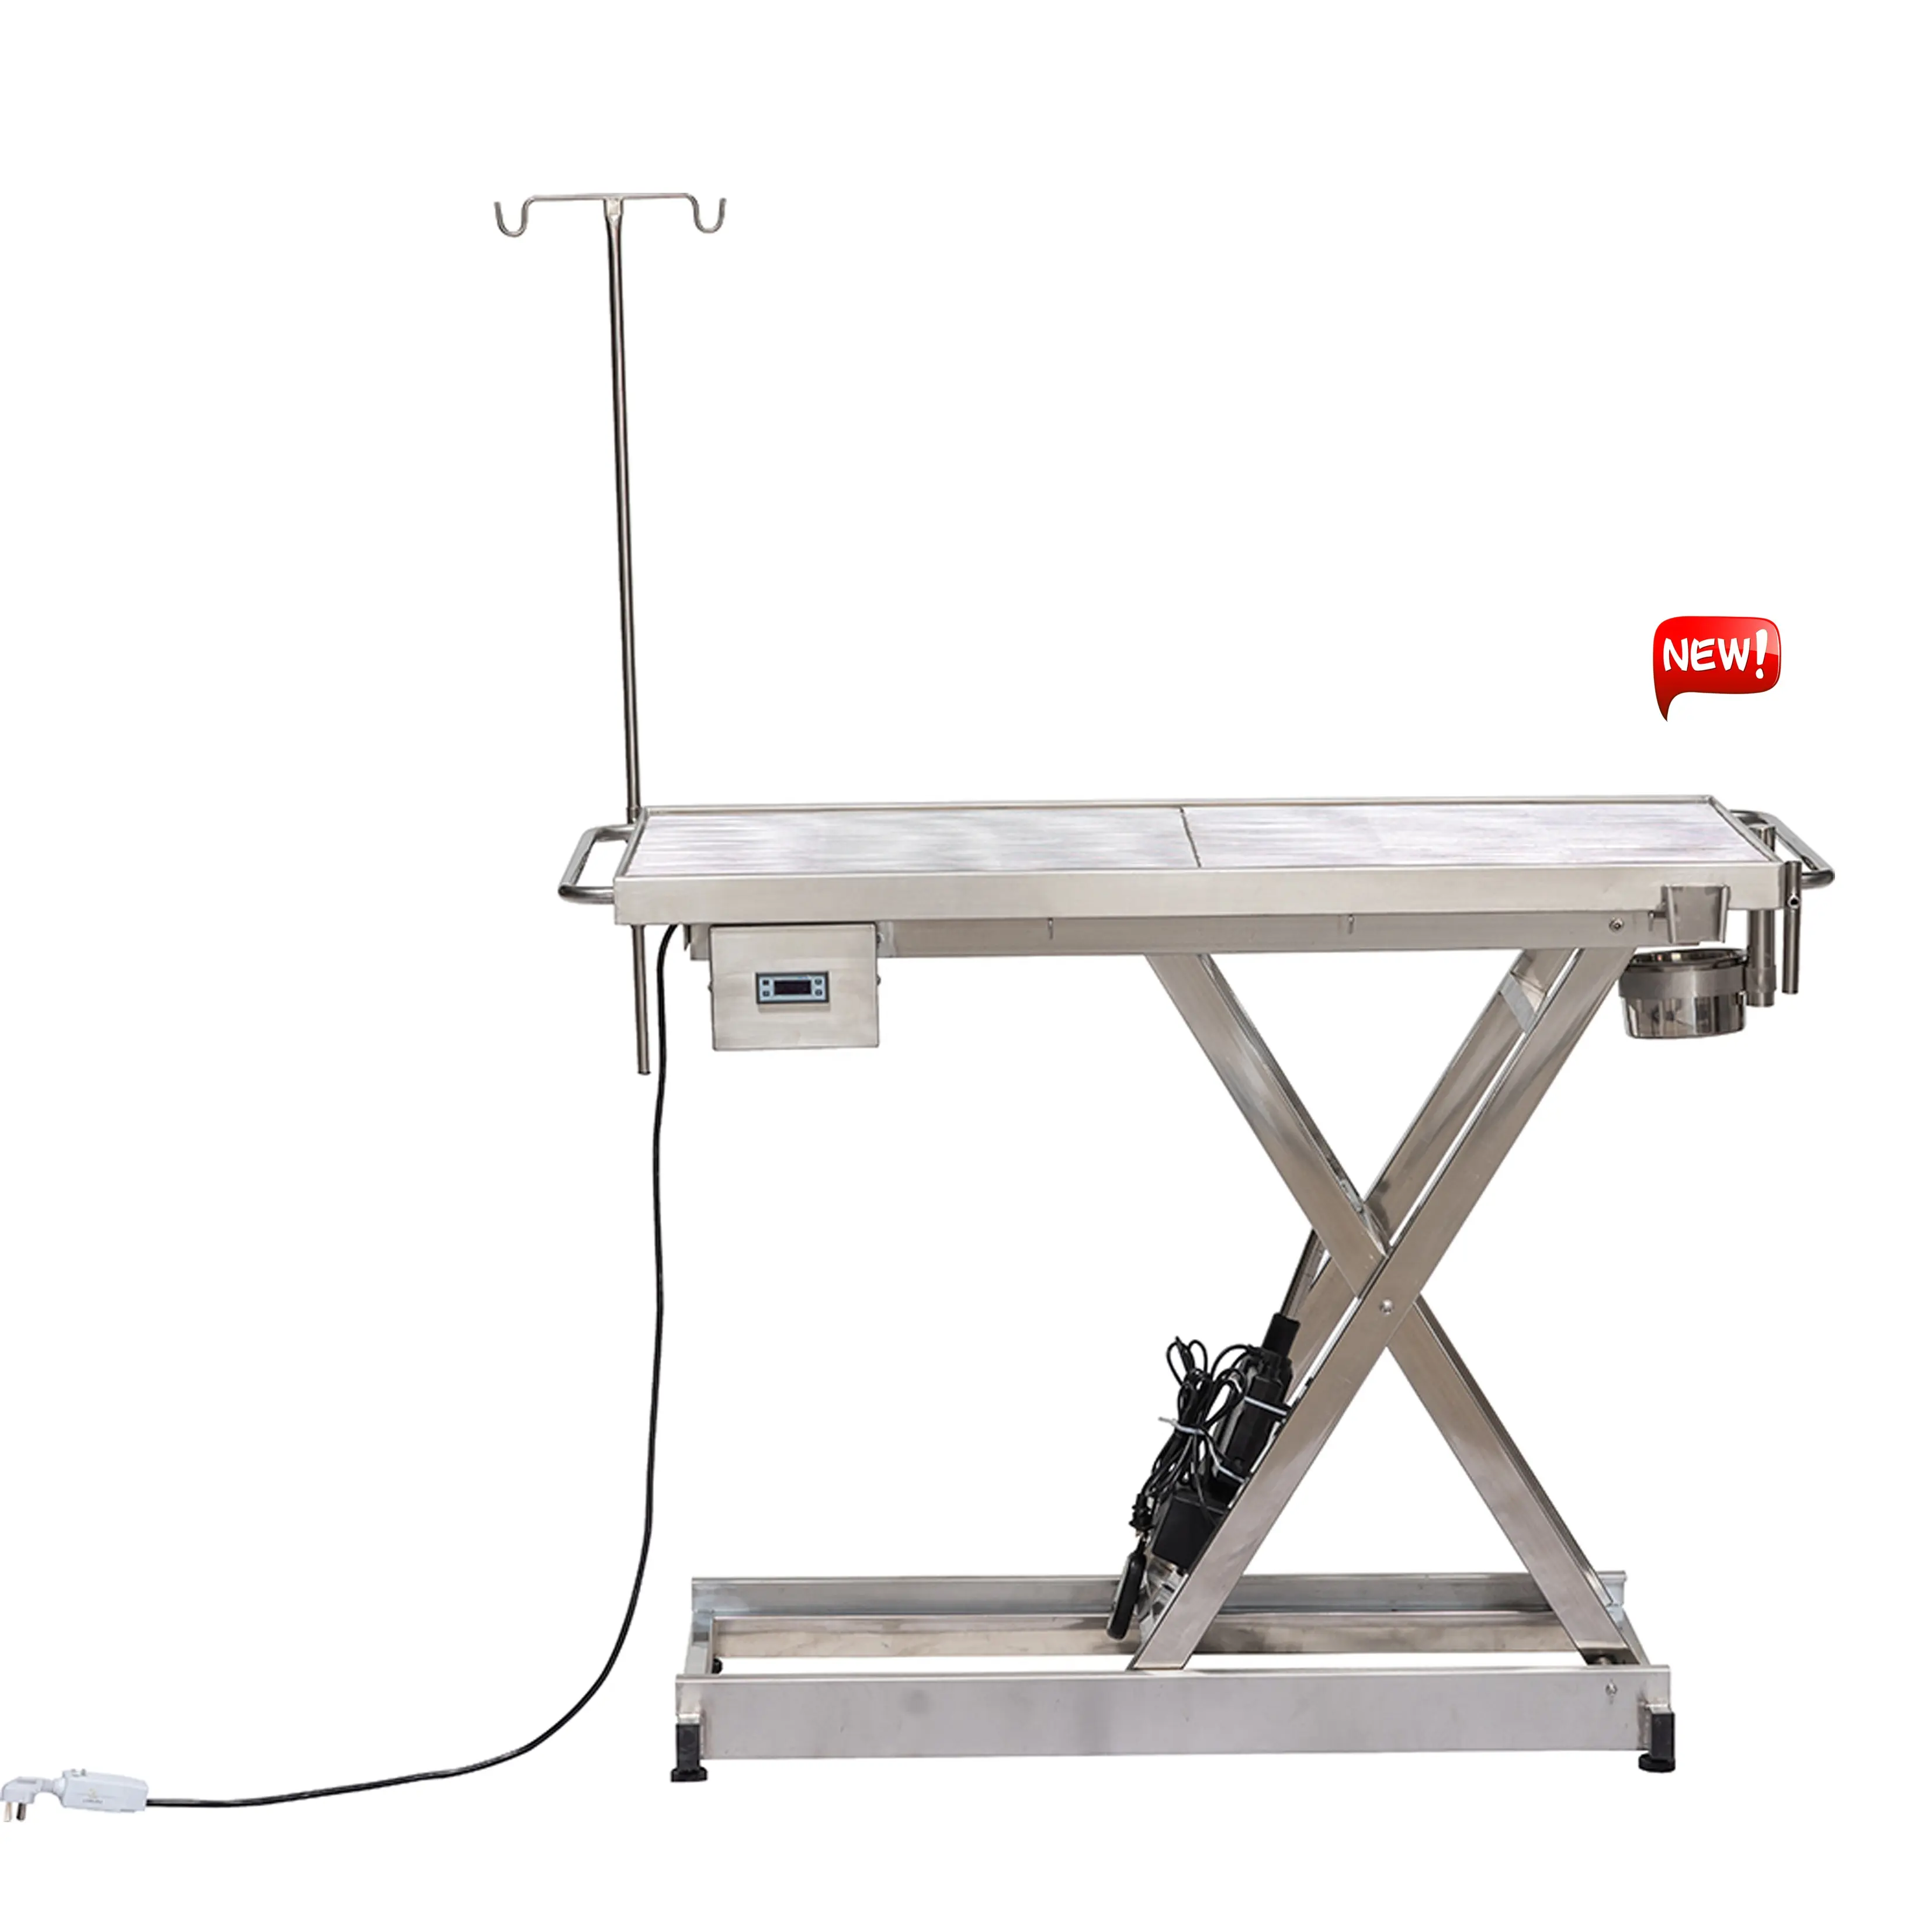 IN-V001 Top-Selling Animal Product Clinic Veterinary Surgical Table